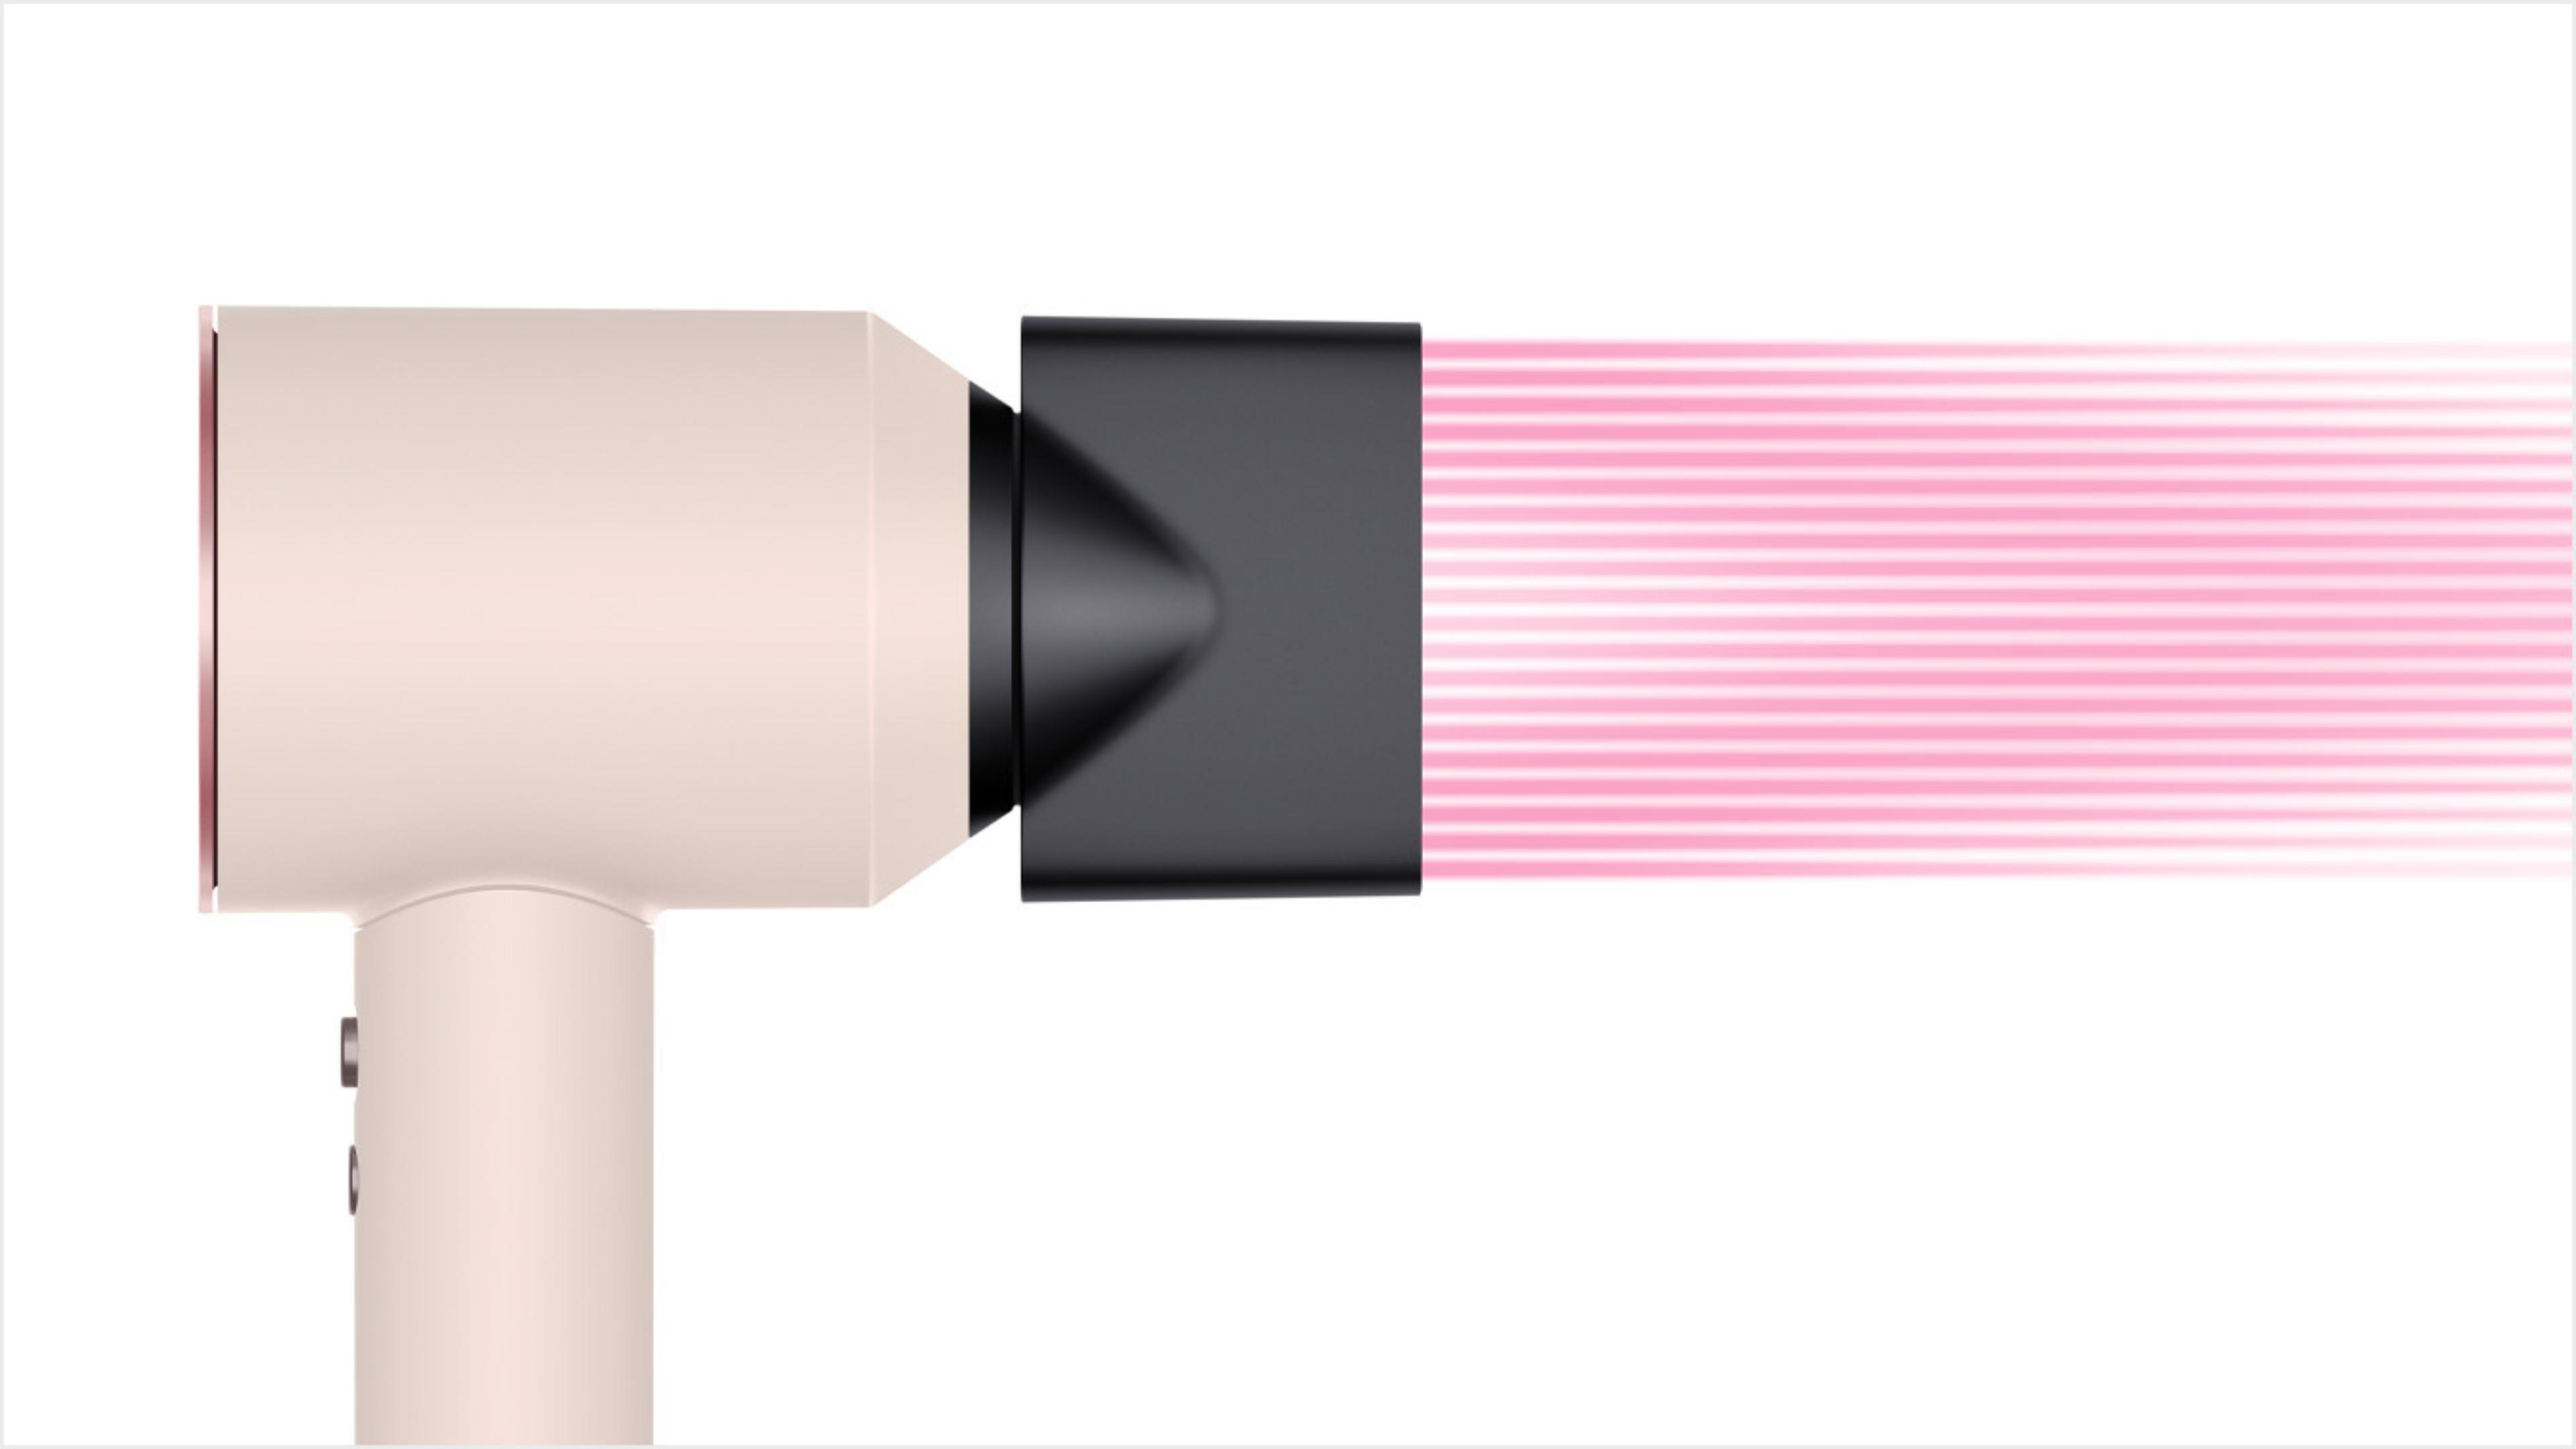 Dyson Supersonic™ hair dryer in Ceramic pink and rose gold